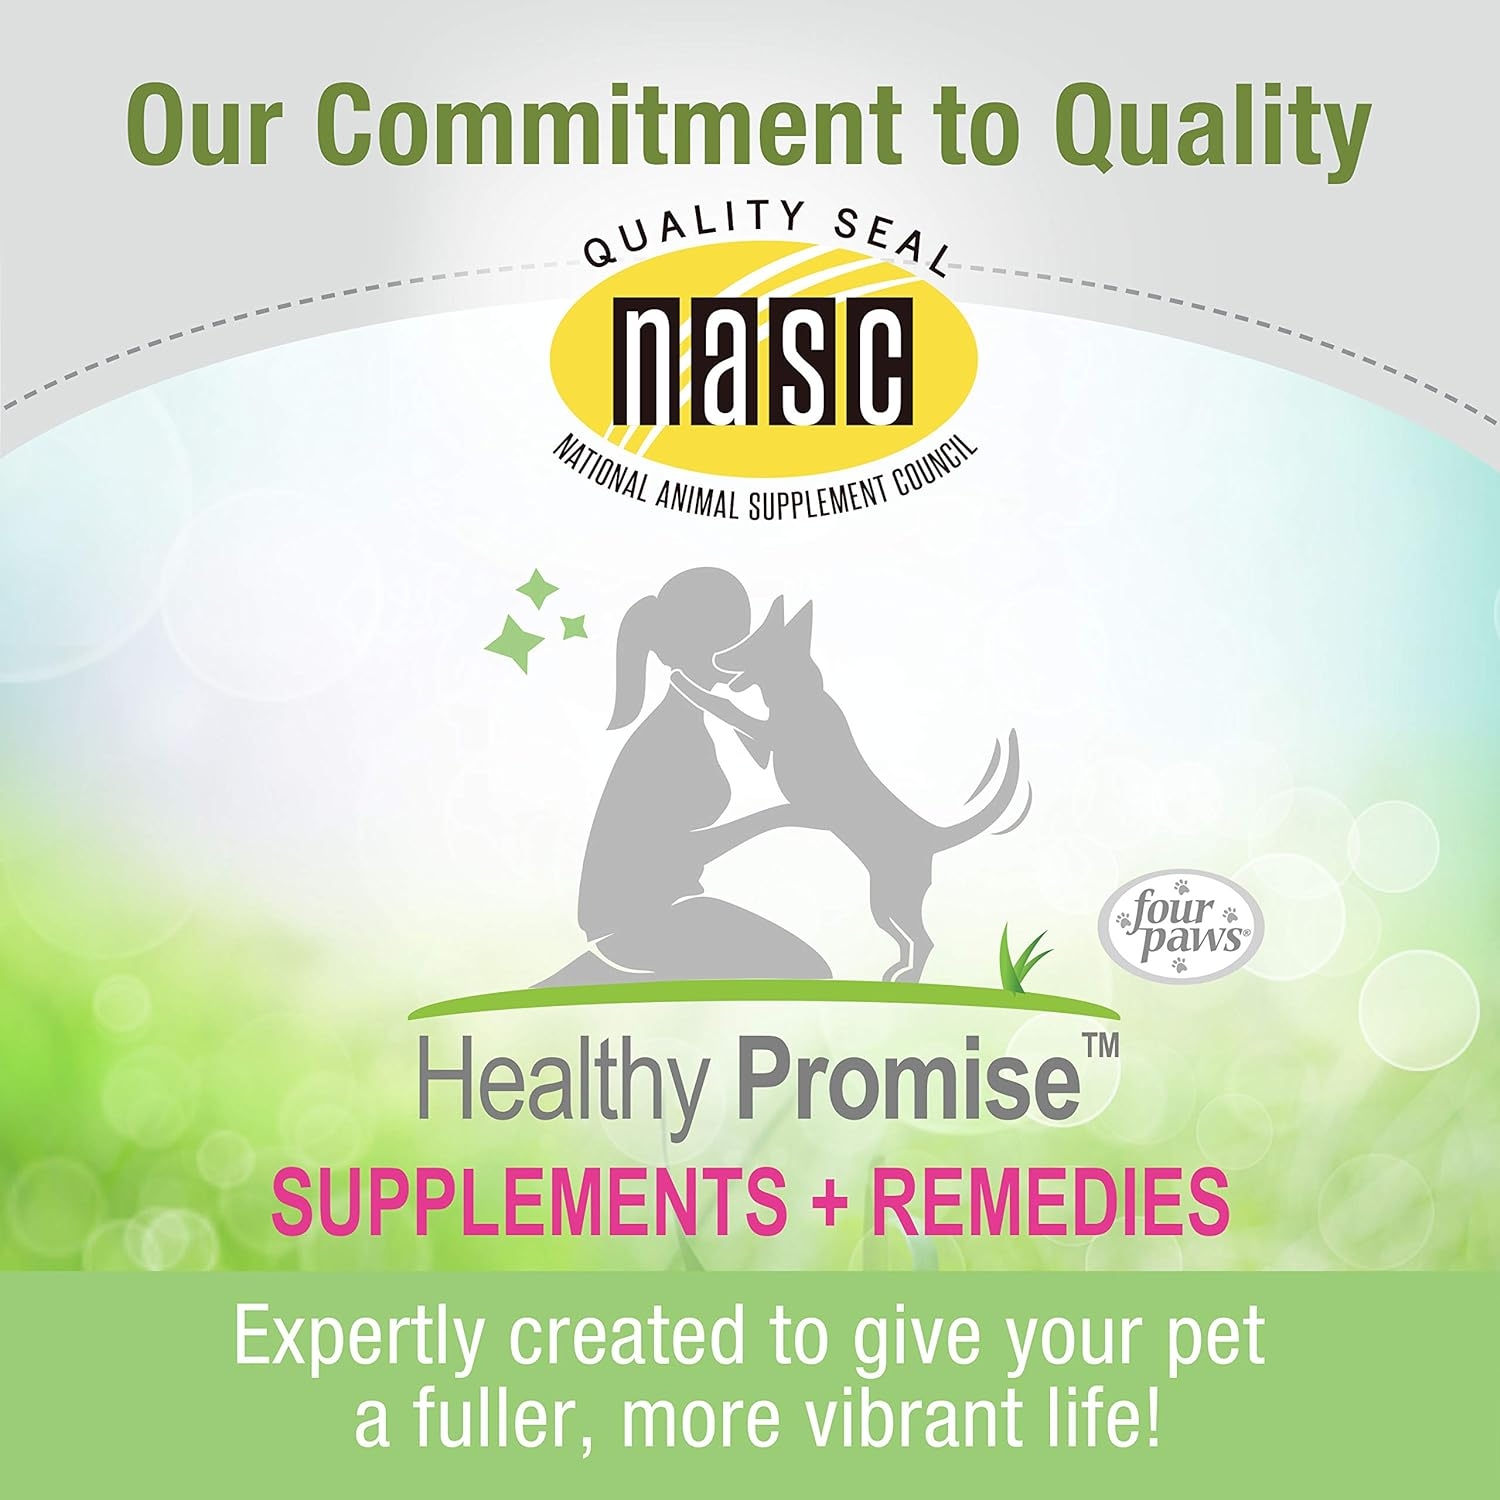 Four Paws Healthy Promise Dog Supplements, Tasty Superblend Dog Supplements & Remedies- Pre & Probiotic, Skin & Coat, Calming, Immunity, Multivitamin, Hip & Joint